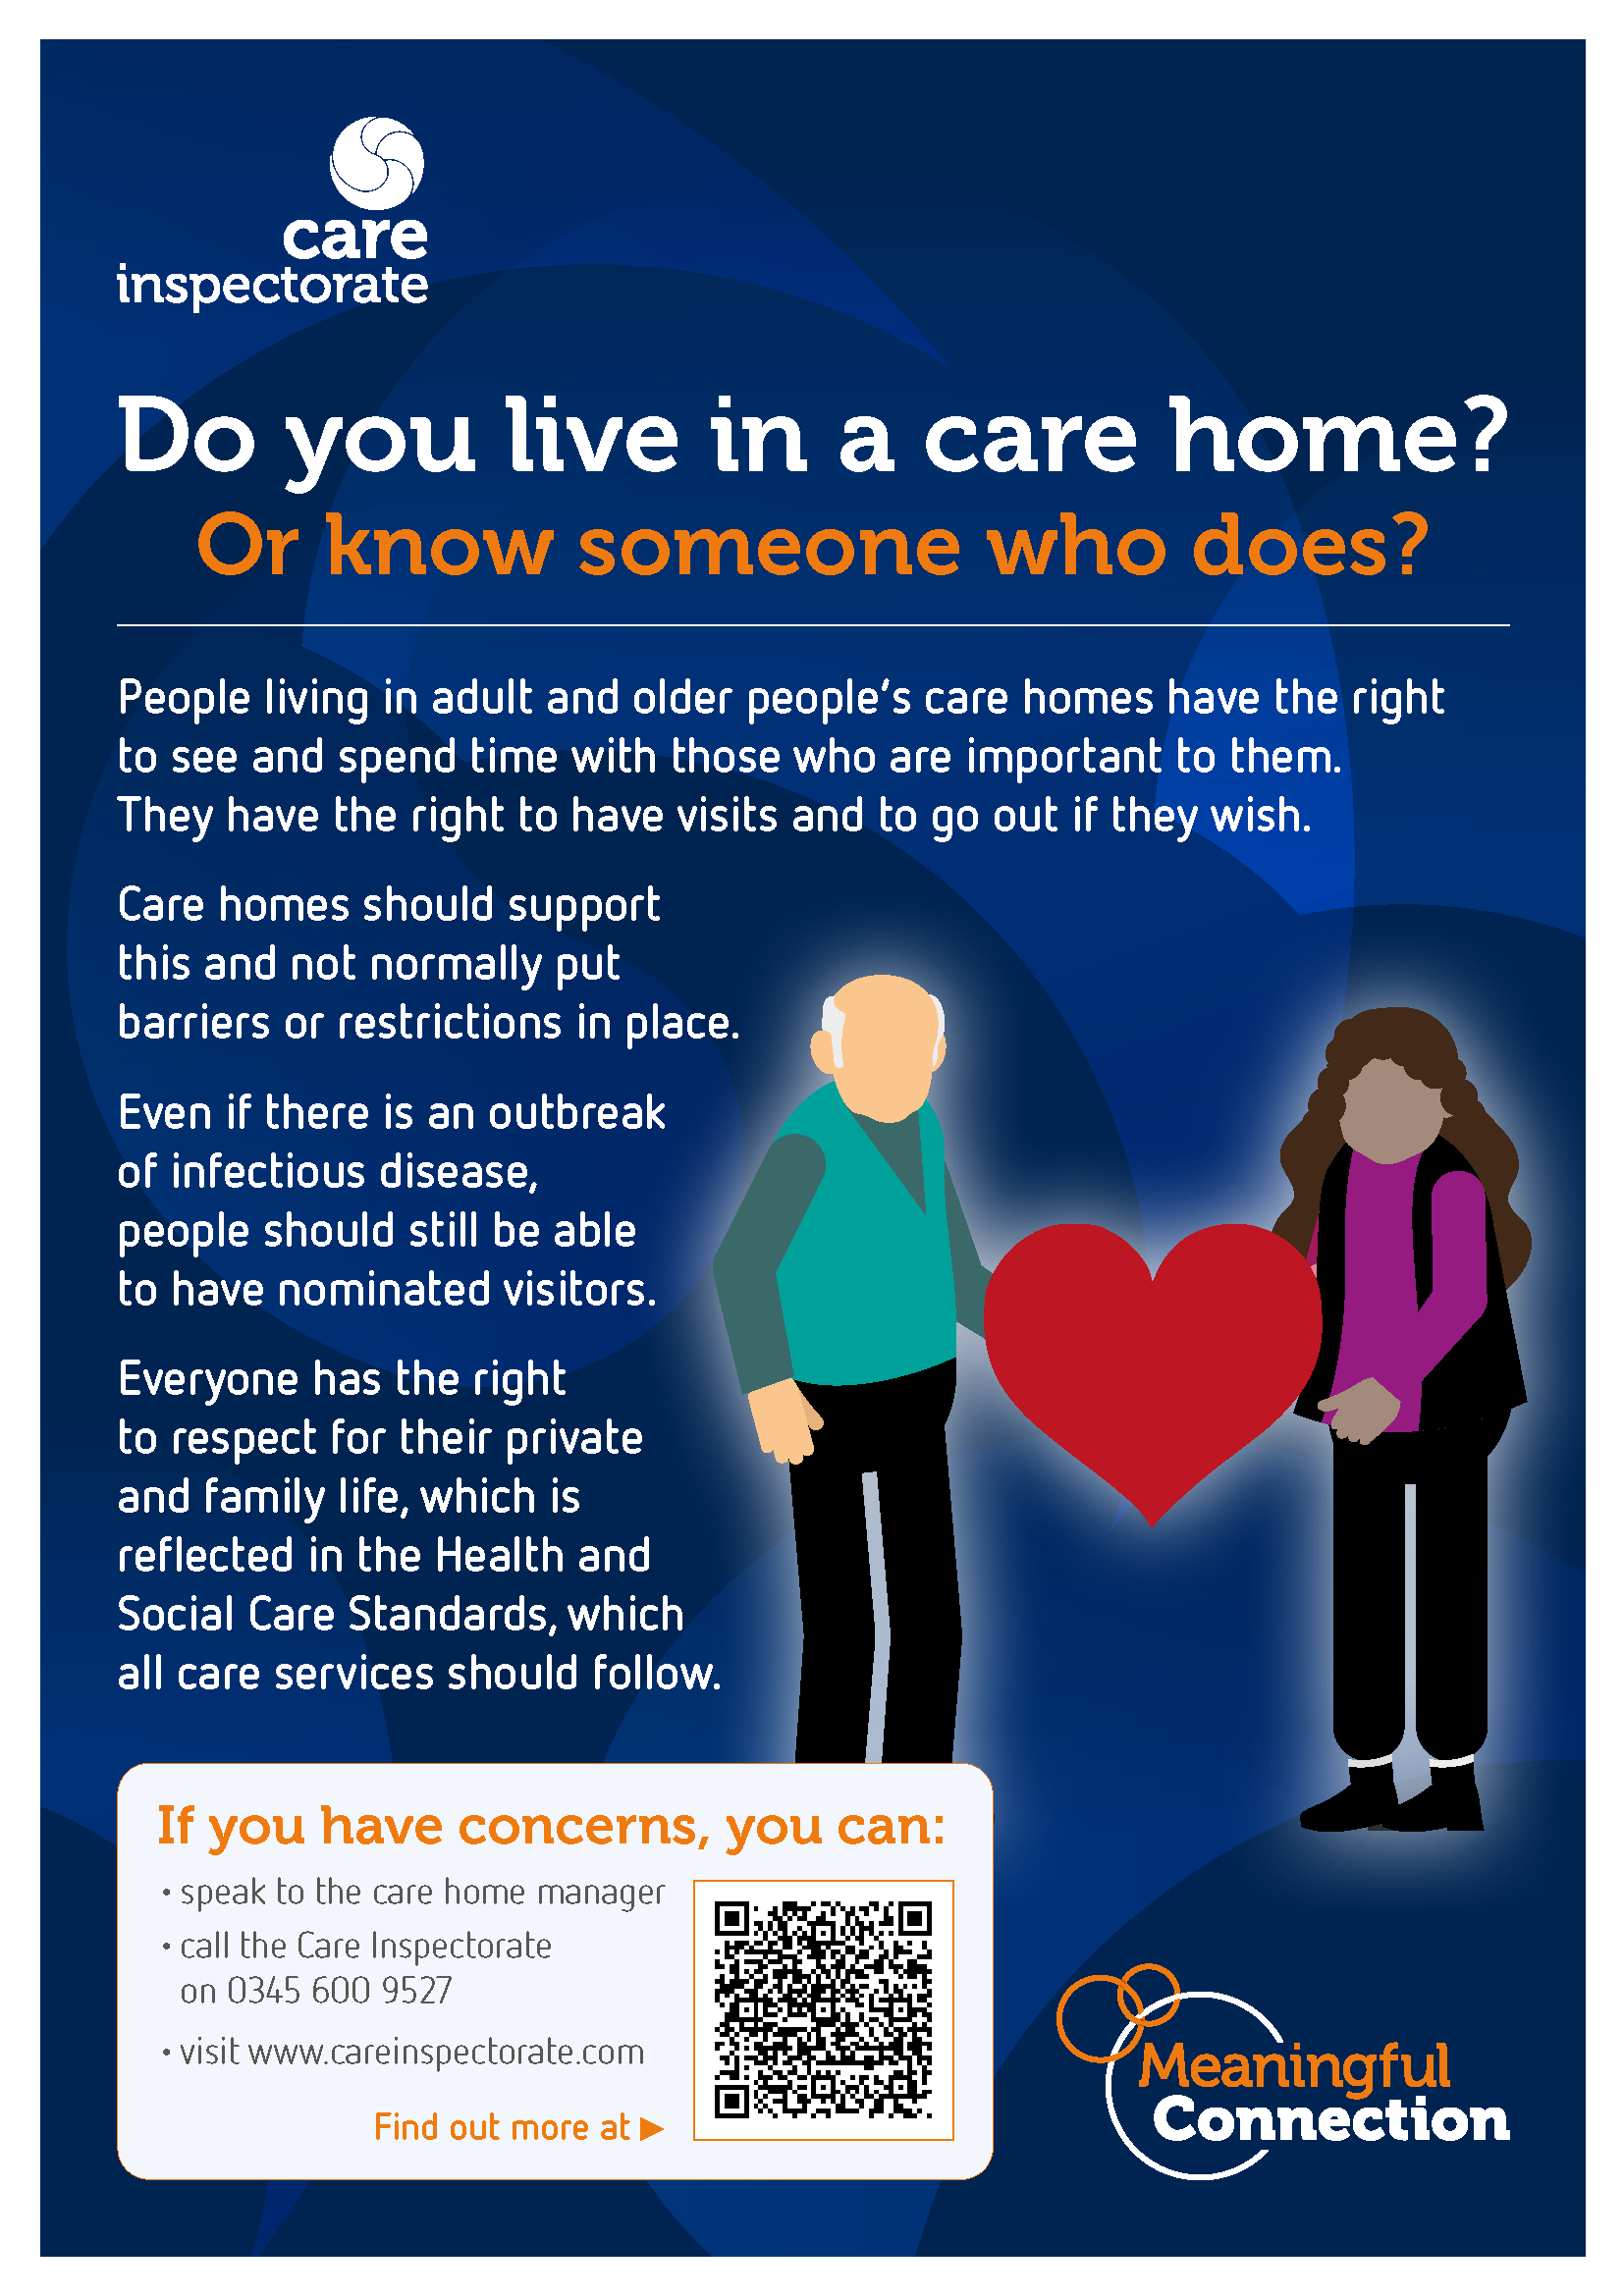 Do you live in a care home poster